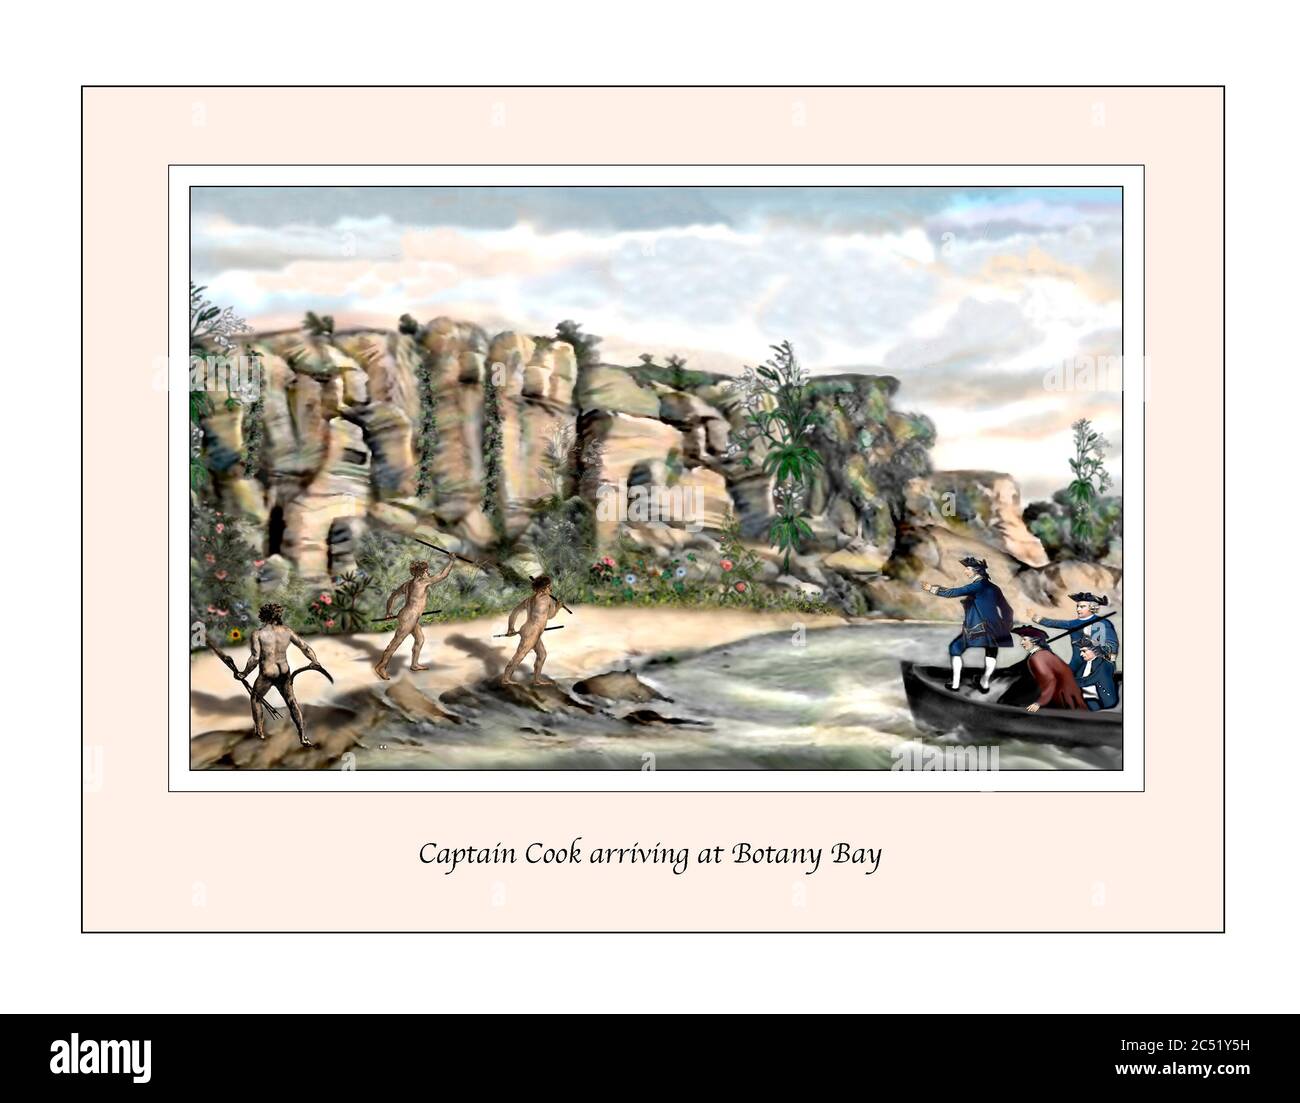 Captain James Cook Arriving at Botany Bay Illustration based on a 19th century painting Stock Photo